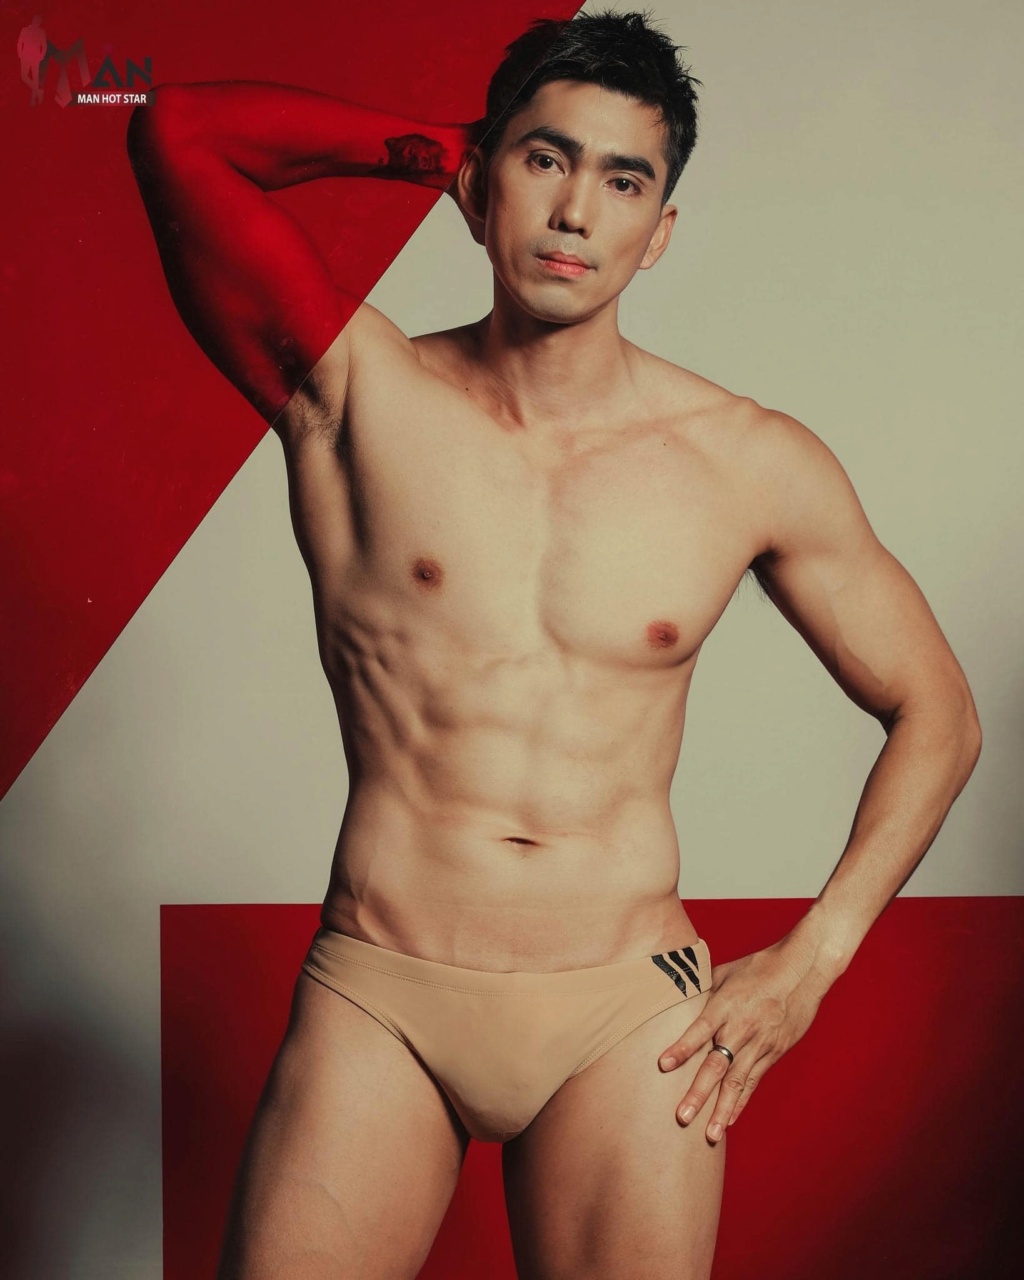 Man Hot Star International 2022 is Jovy Bequillo of the Philippines' 31665810